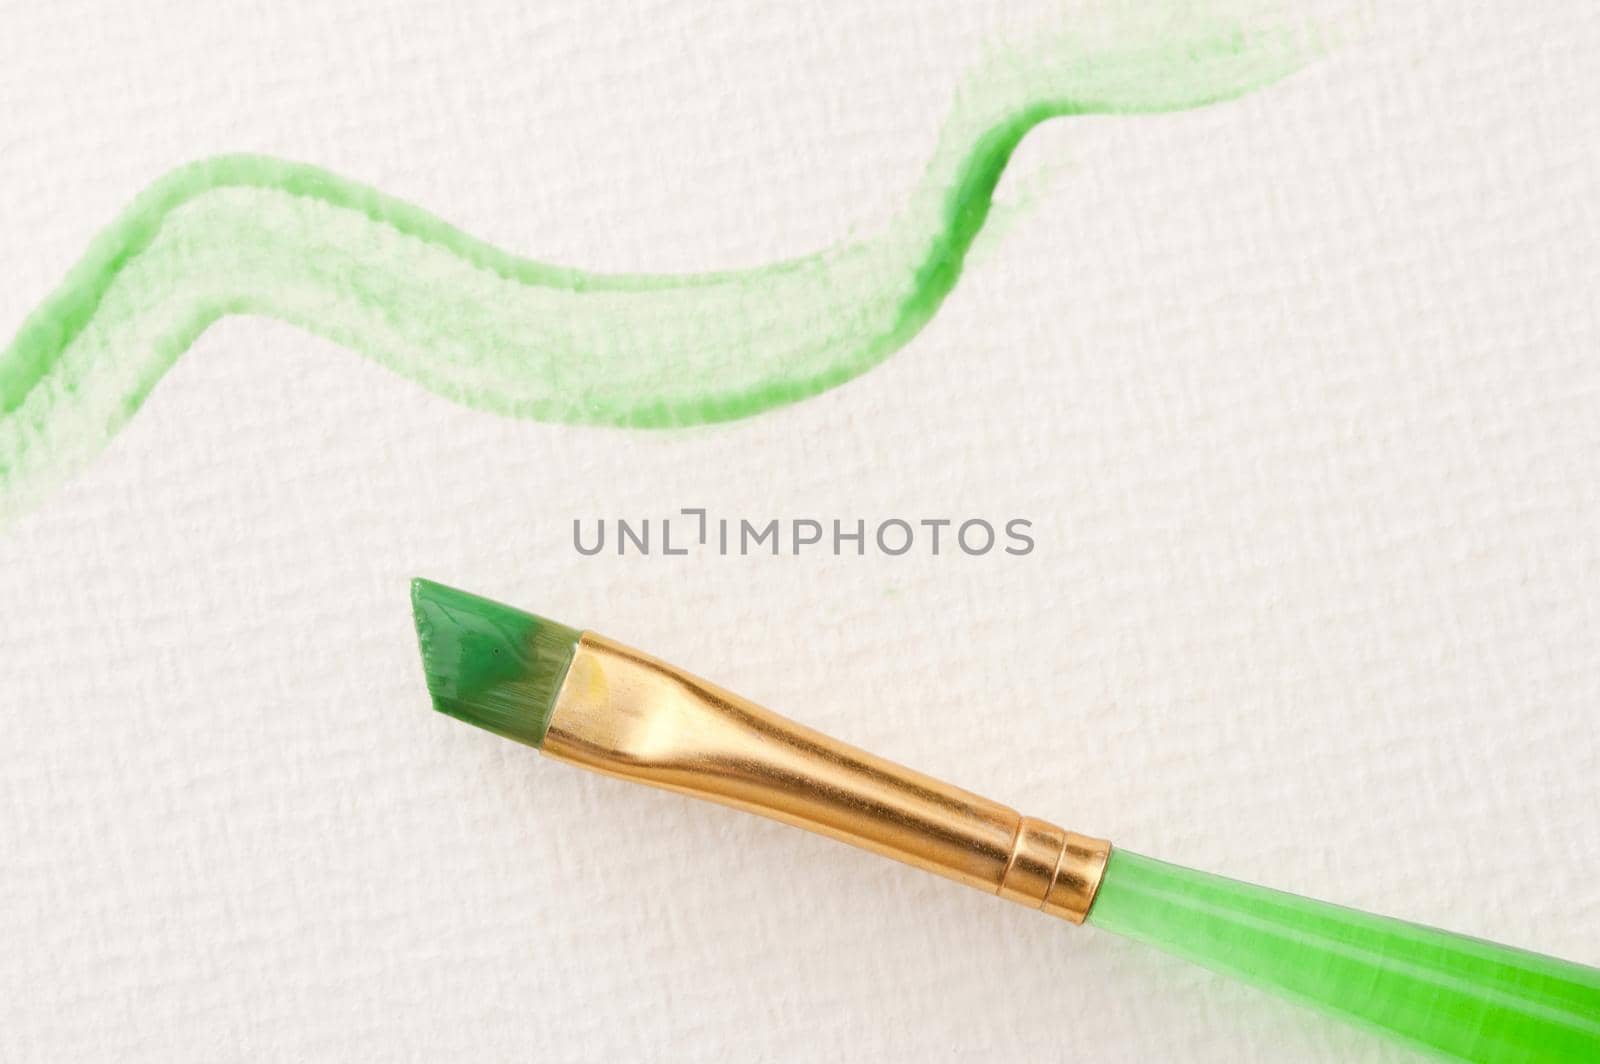 Squiggly green line made with watercolor and paintbrush over textured white canvas paper